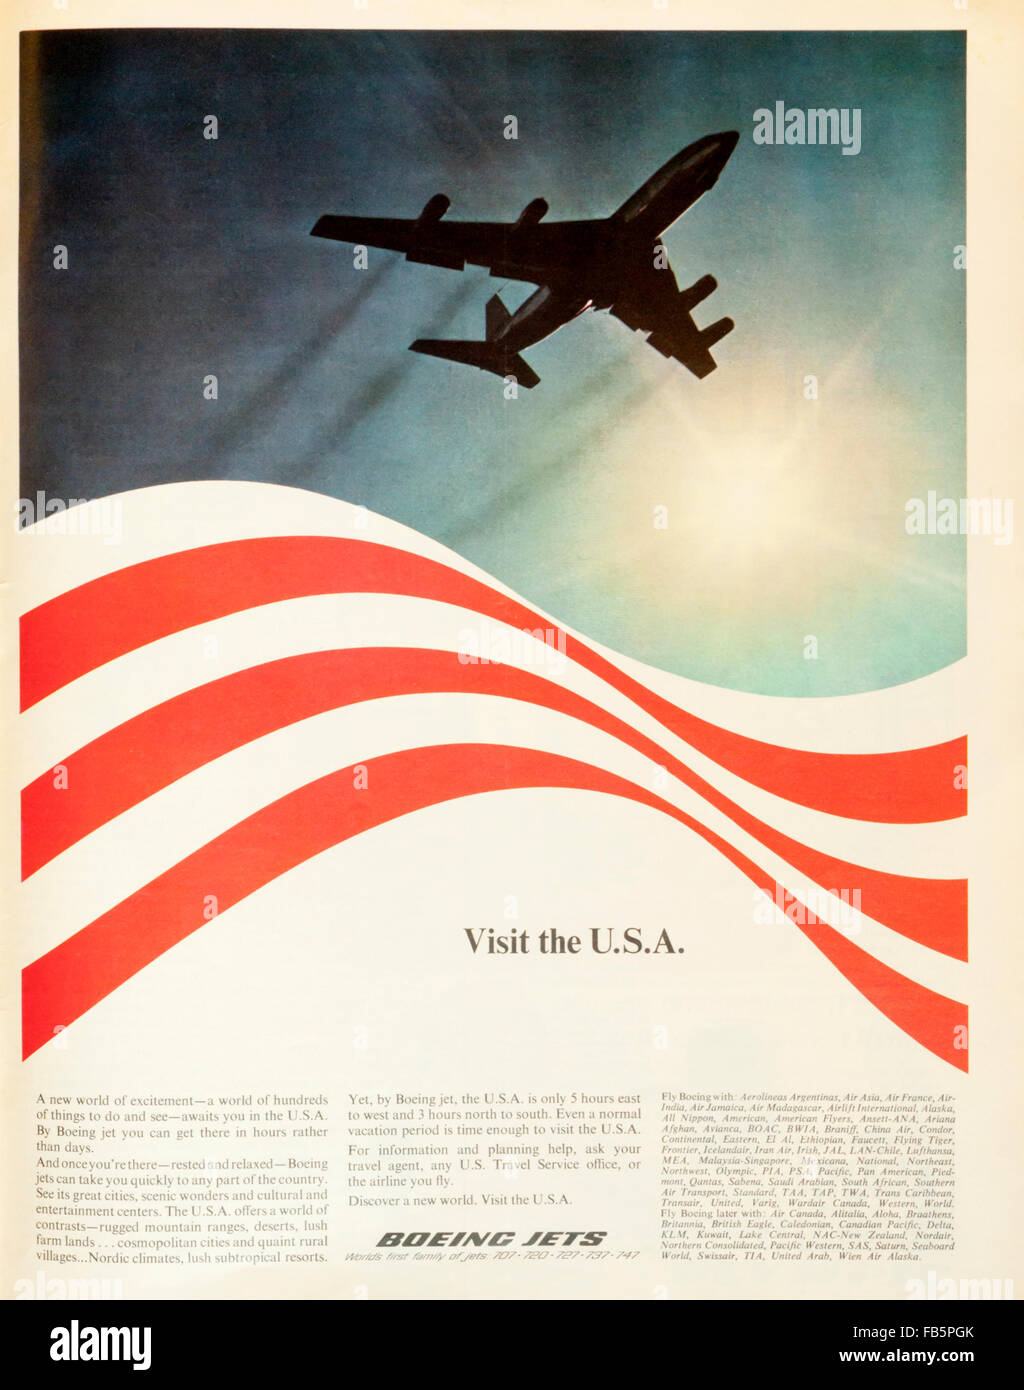 1960s magazine advertisement advertising visiting America by Boeing. Stock Photo